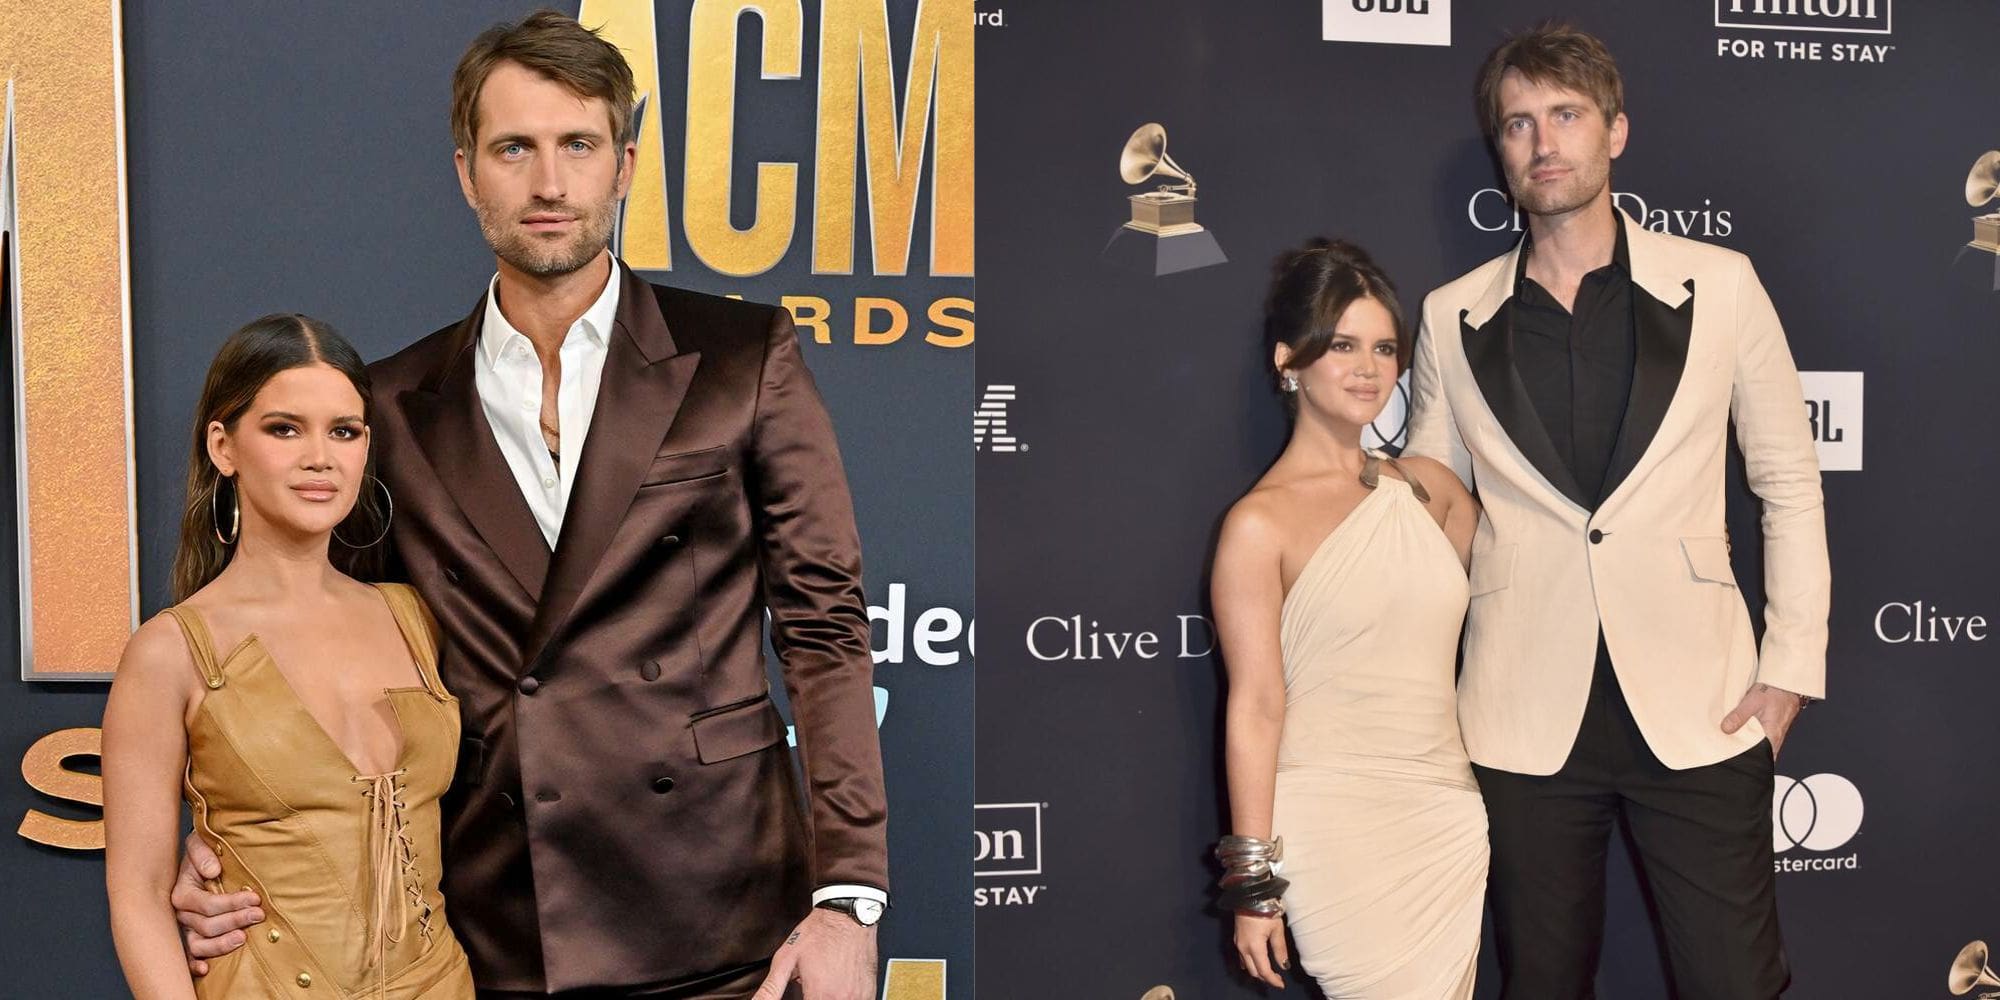 Maren Morris and Ryan Hurd Have Come to a Resolution Three Months After Filing for Divorce, Reaching a Settlement Agreement.